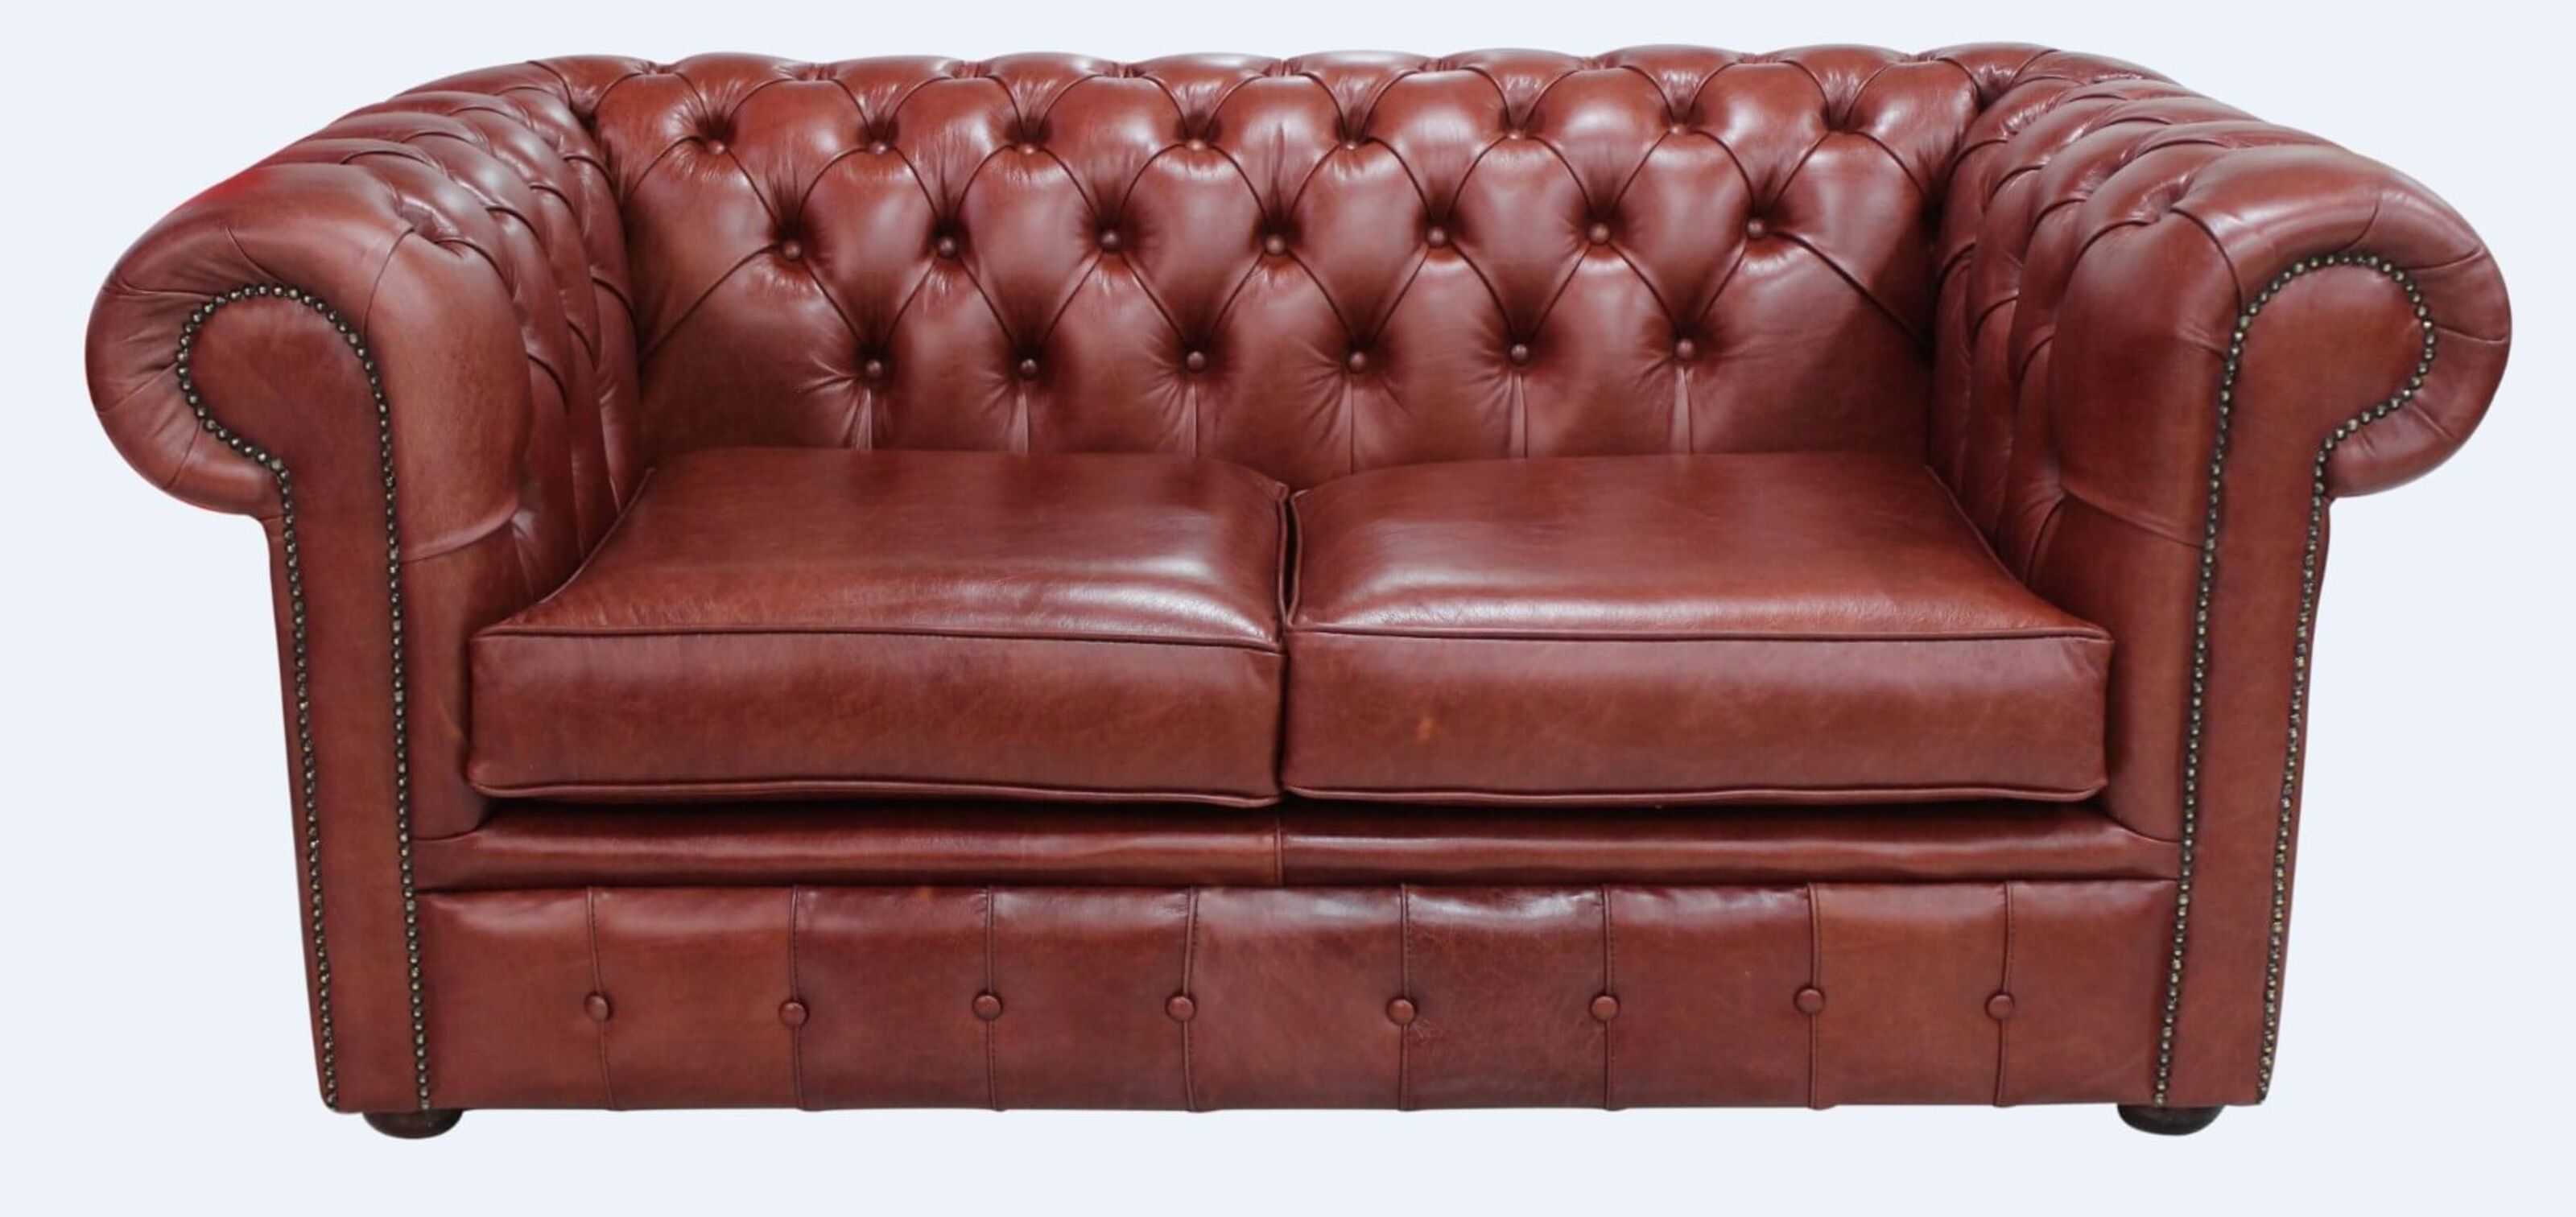 Chestnut Leather Chesterfield Sofas, Traditional English Leather Sofas